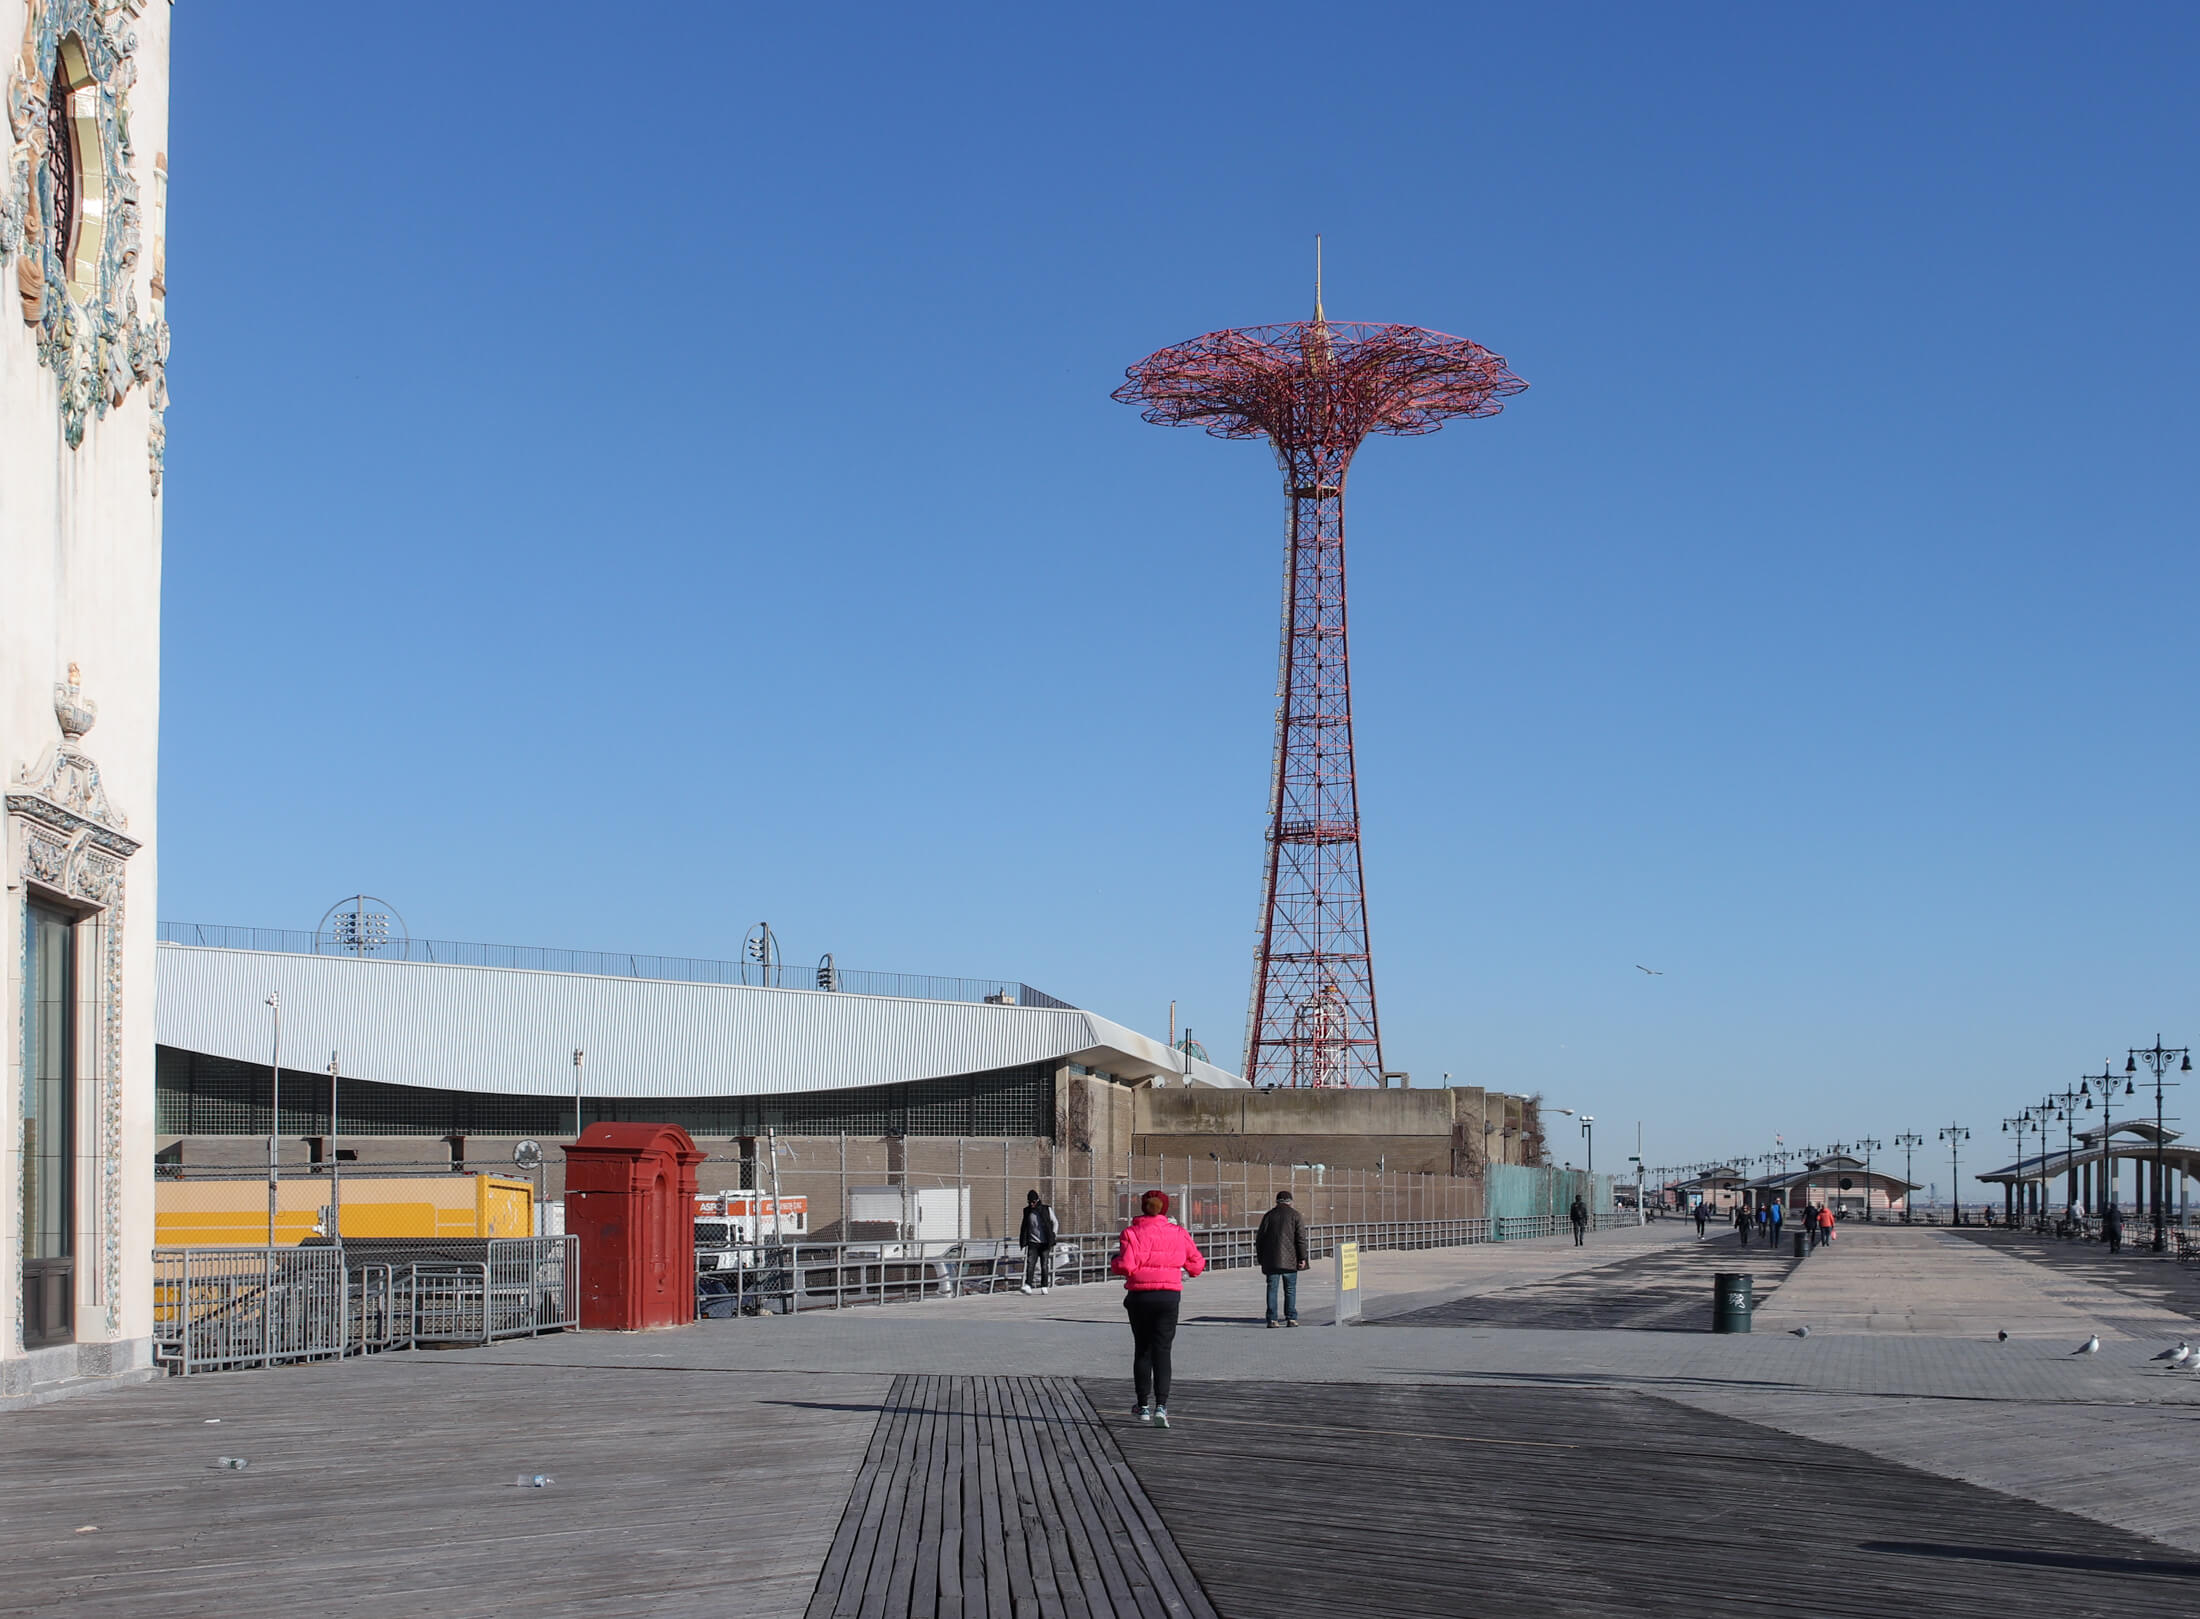 Coney Island Locals Frustrated Over Delays to Repair of Historic